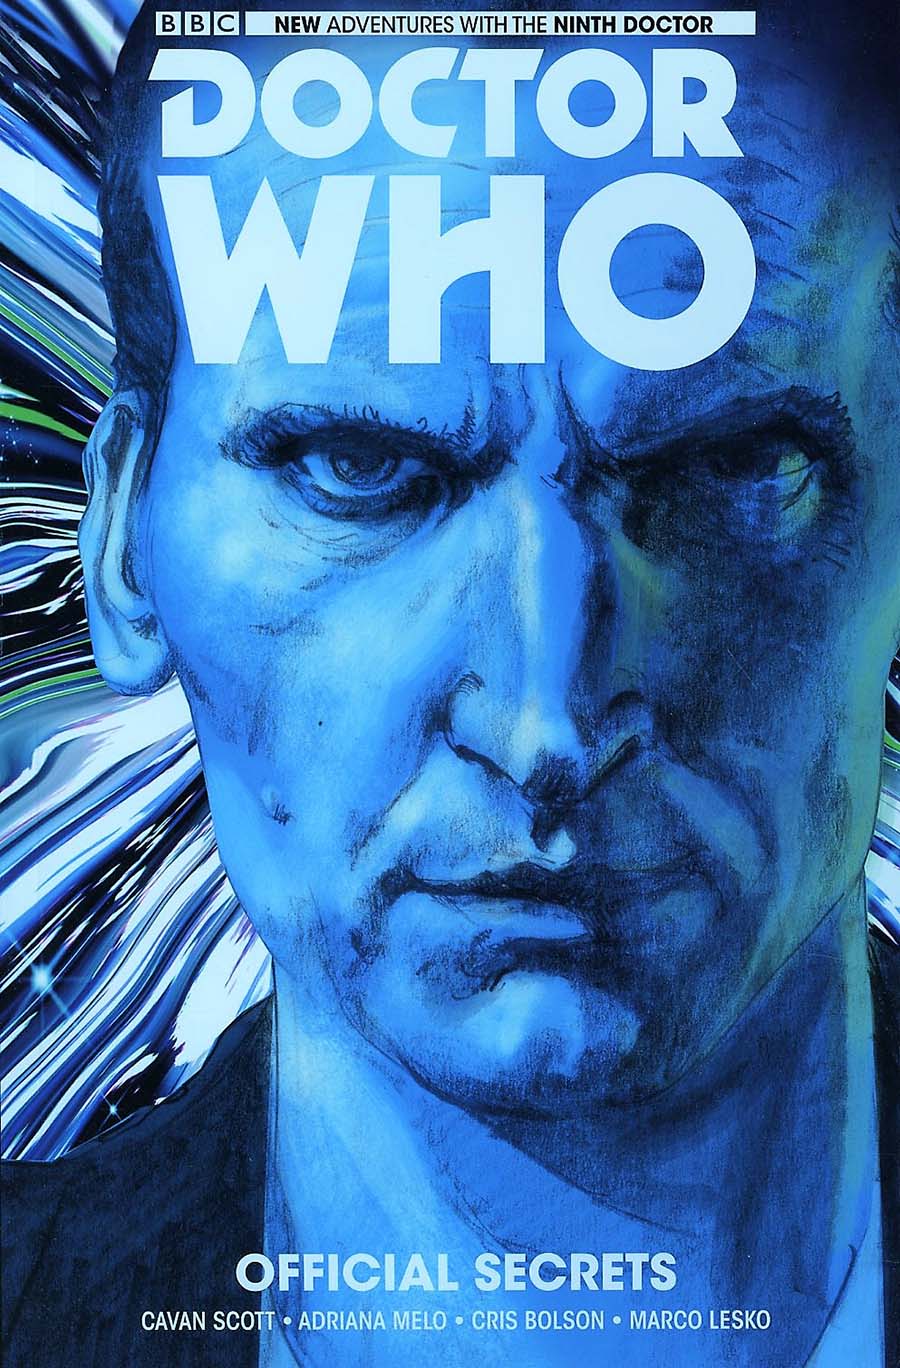 Doctor Who 9th Doctor Vol 3 Official Secrets TP